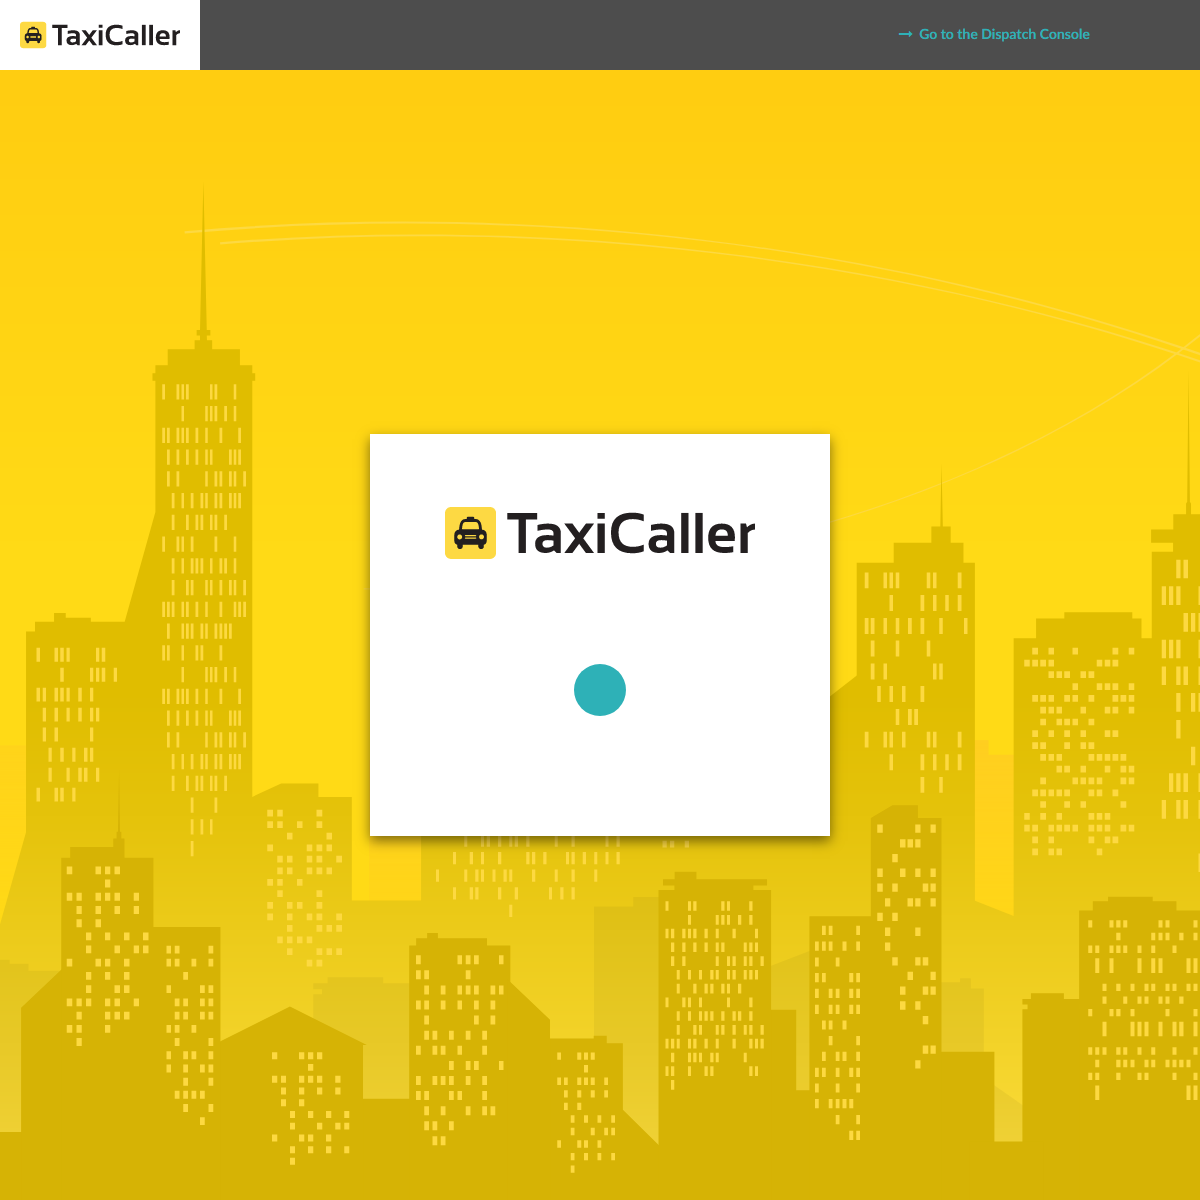 A complete backup of https://portal.taxicaller.net/dispatch/settings/general